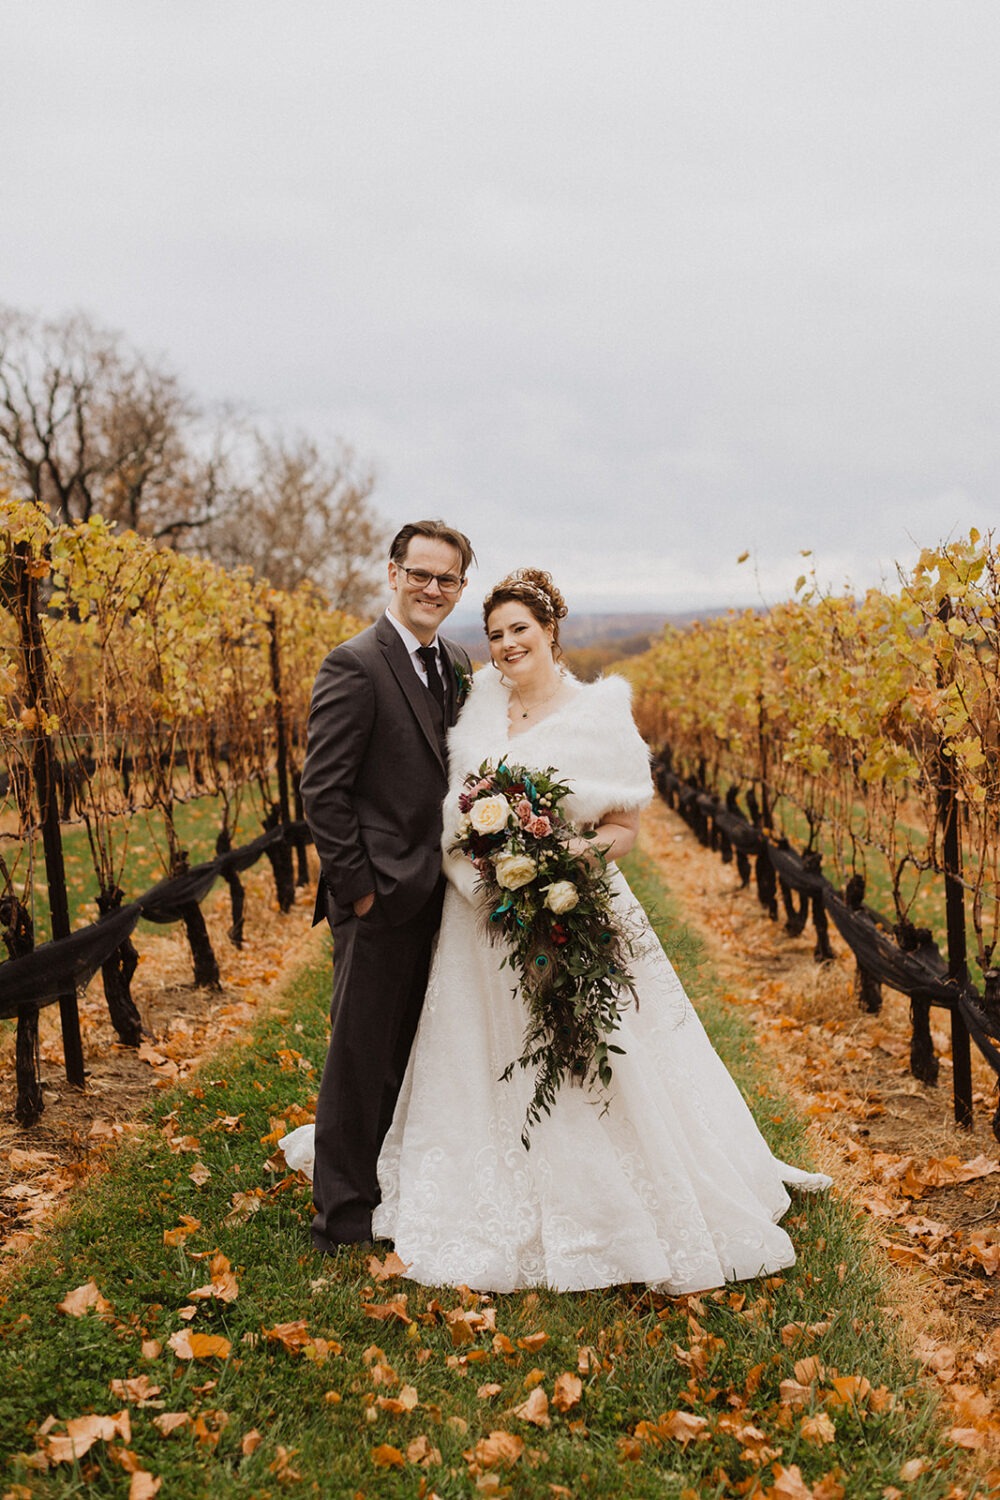 couple poses together in fall vineyard following wedding planning tips and advice